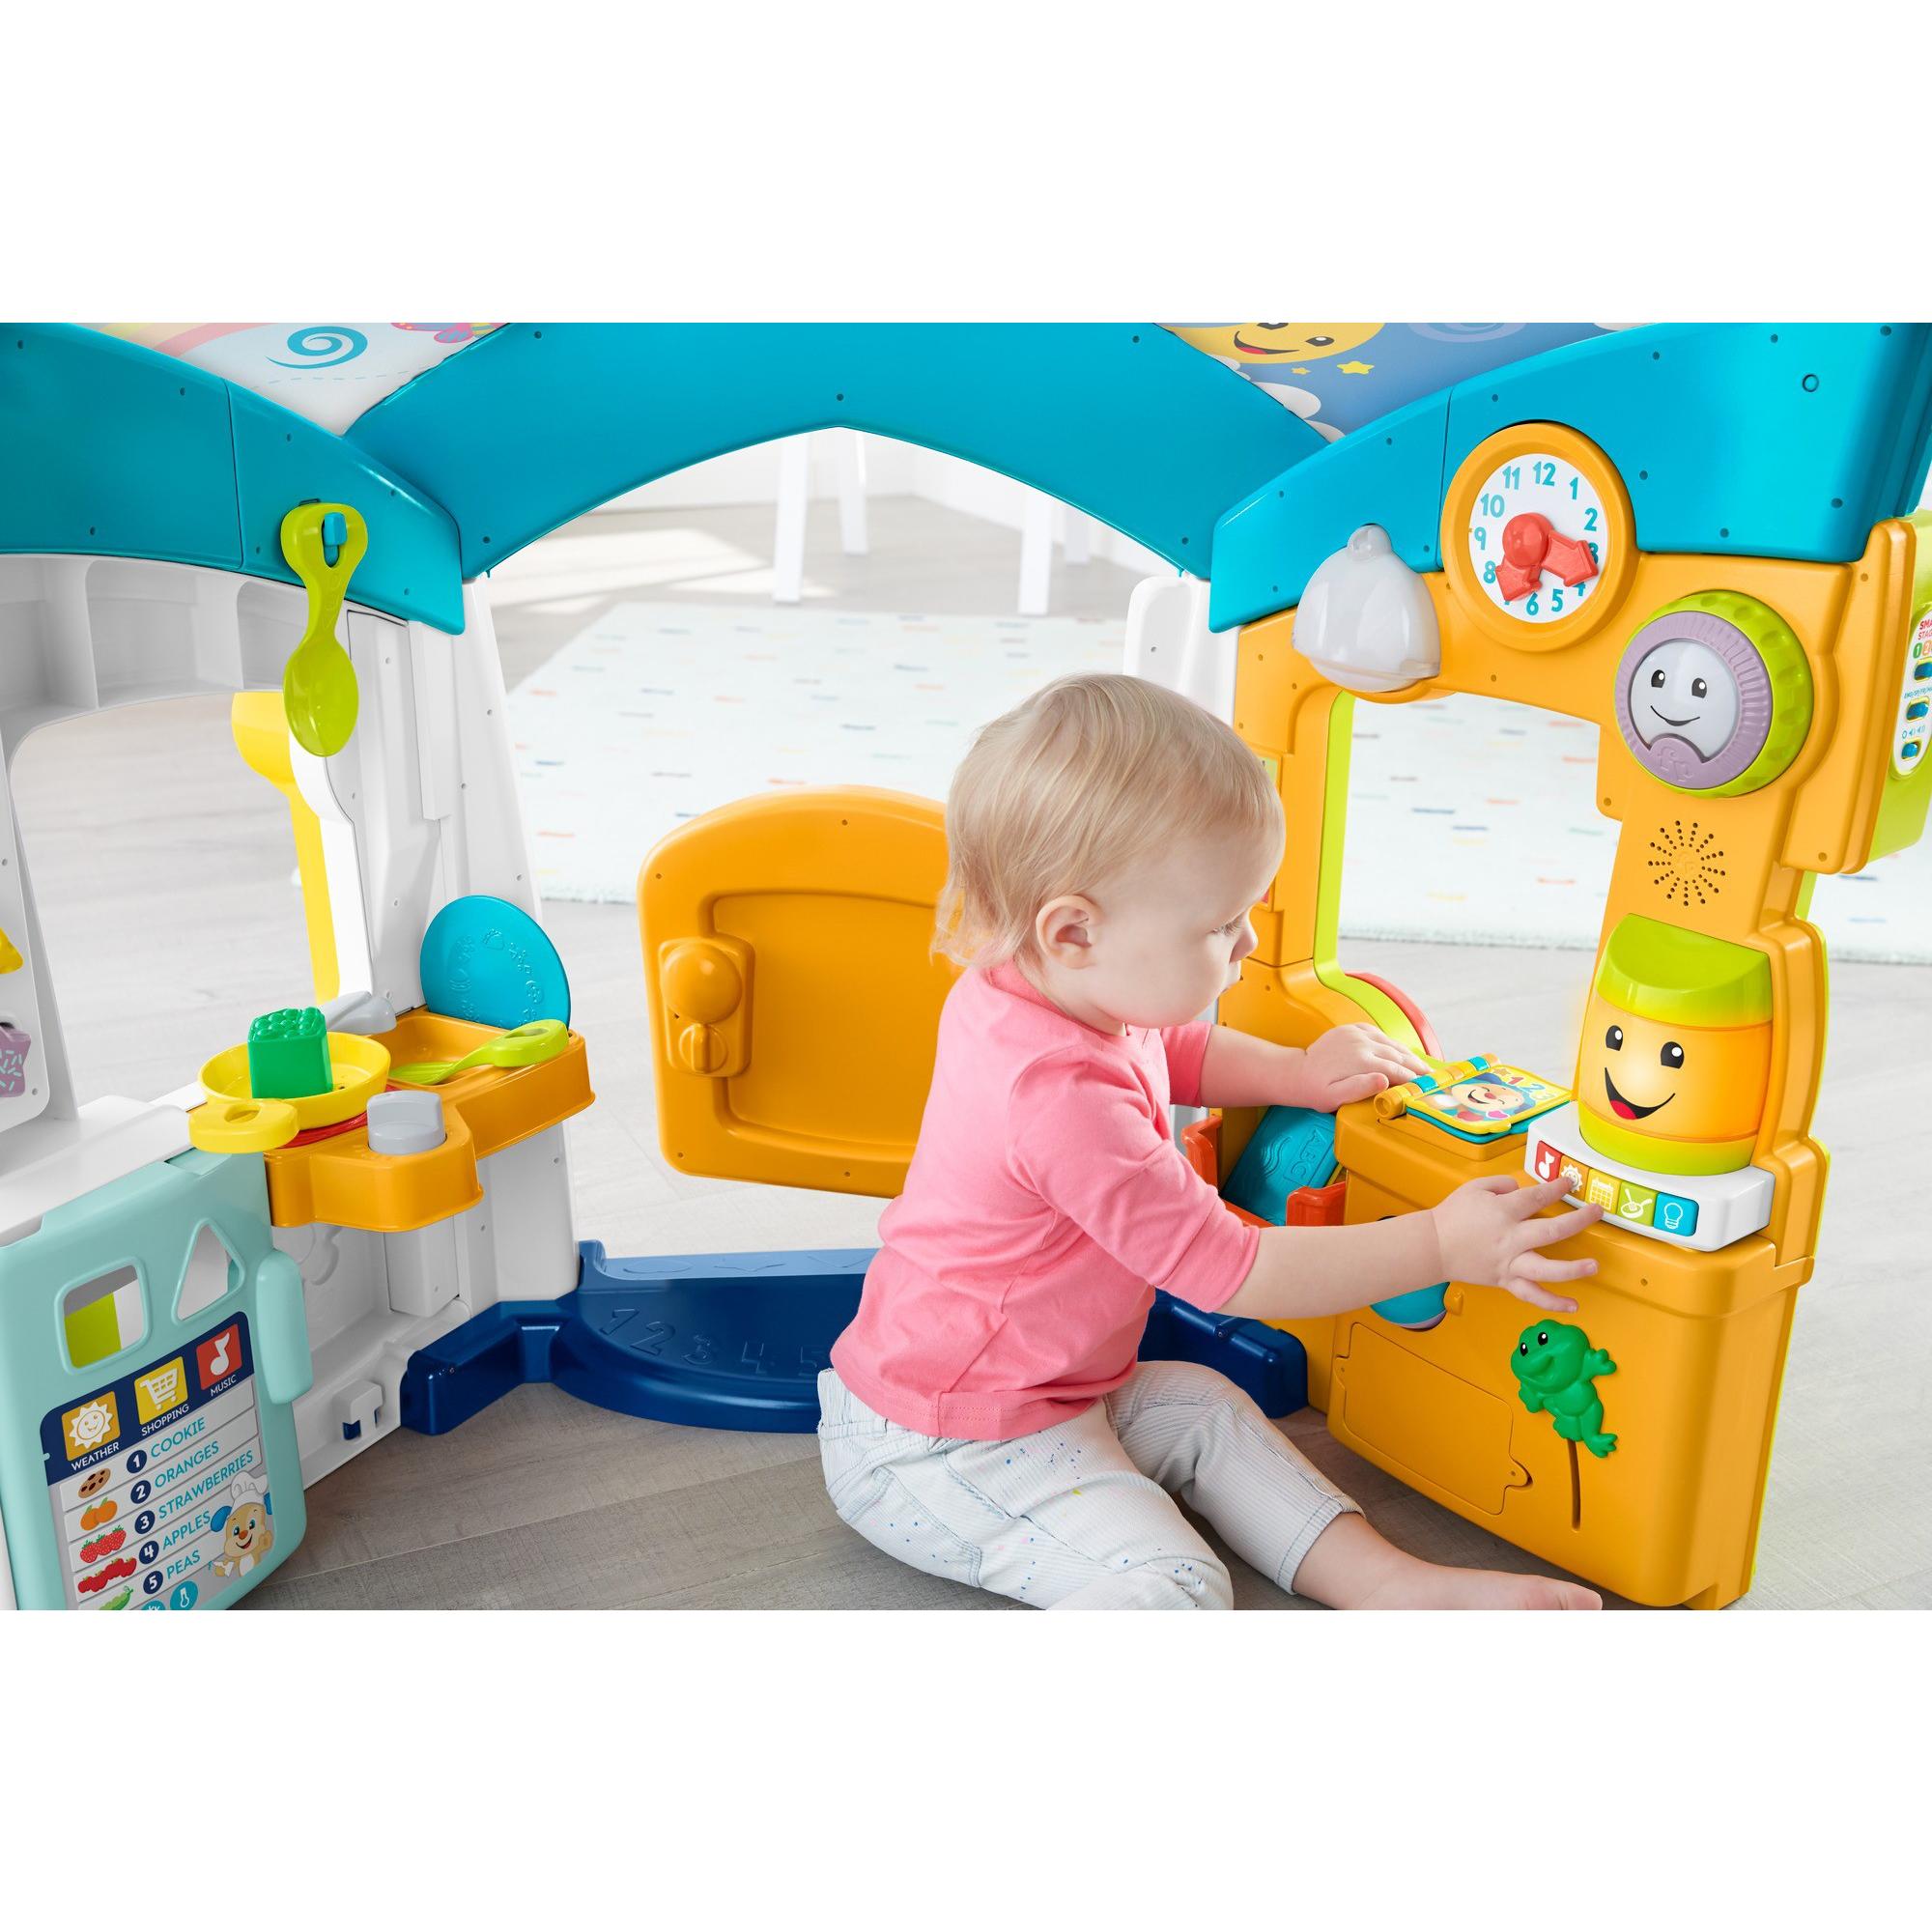 Fisher-Price Laugh & Learn Playhouse Educational Toy for Babies & Toddlers, Smart Learning Home - image 21 of 25